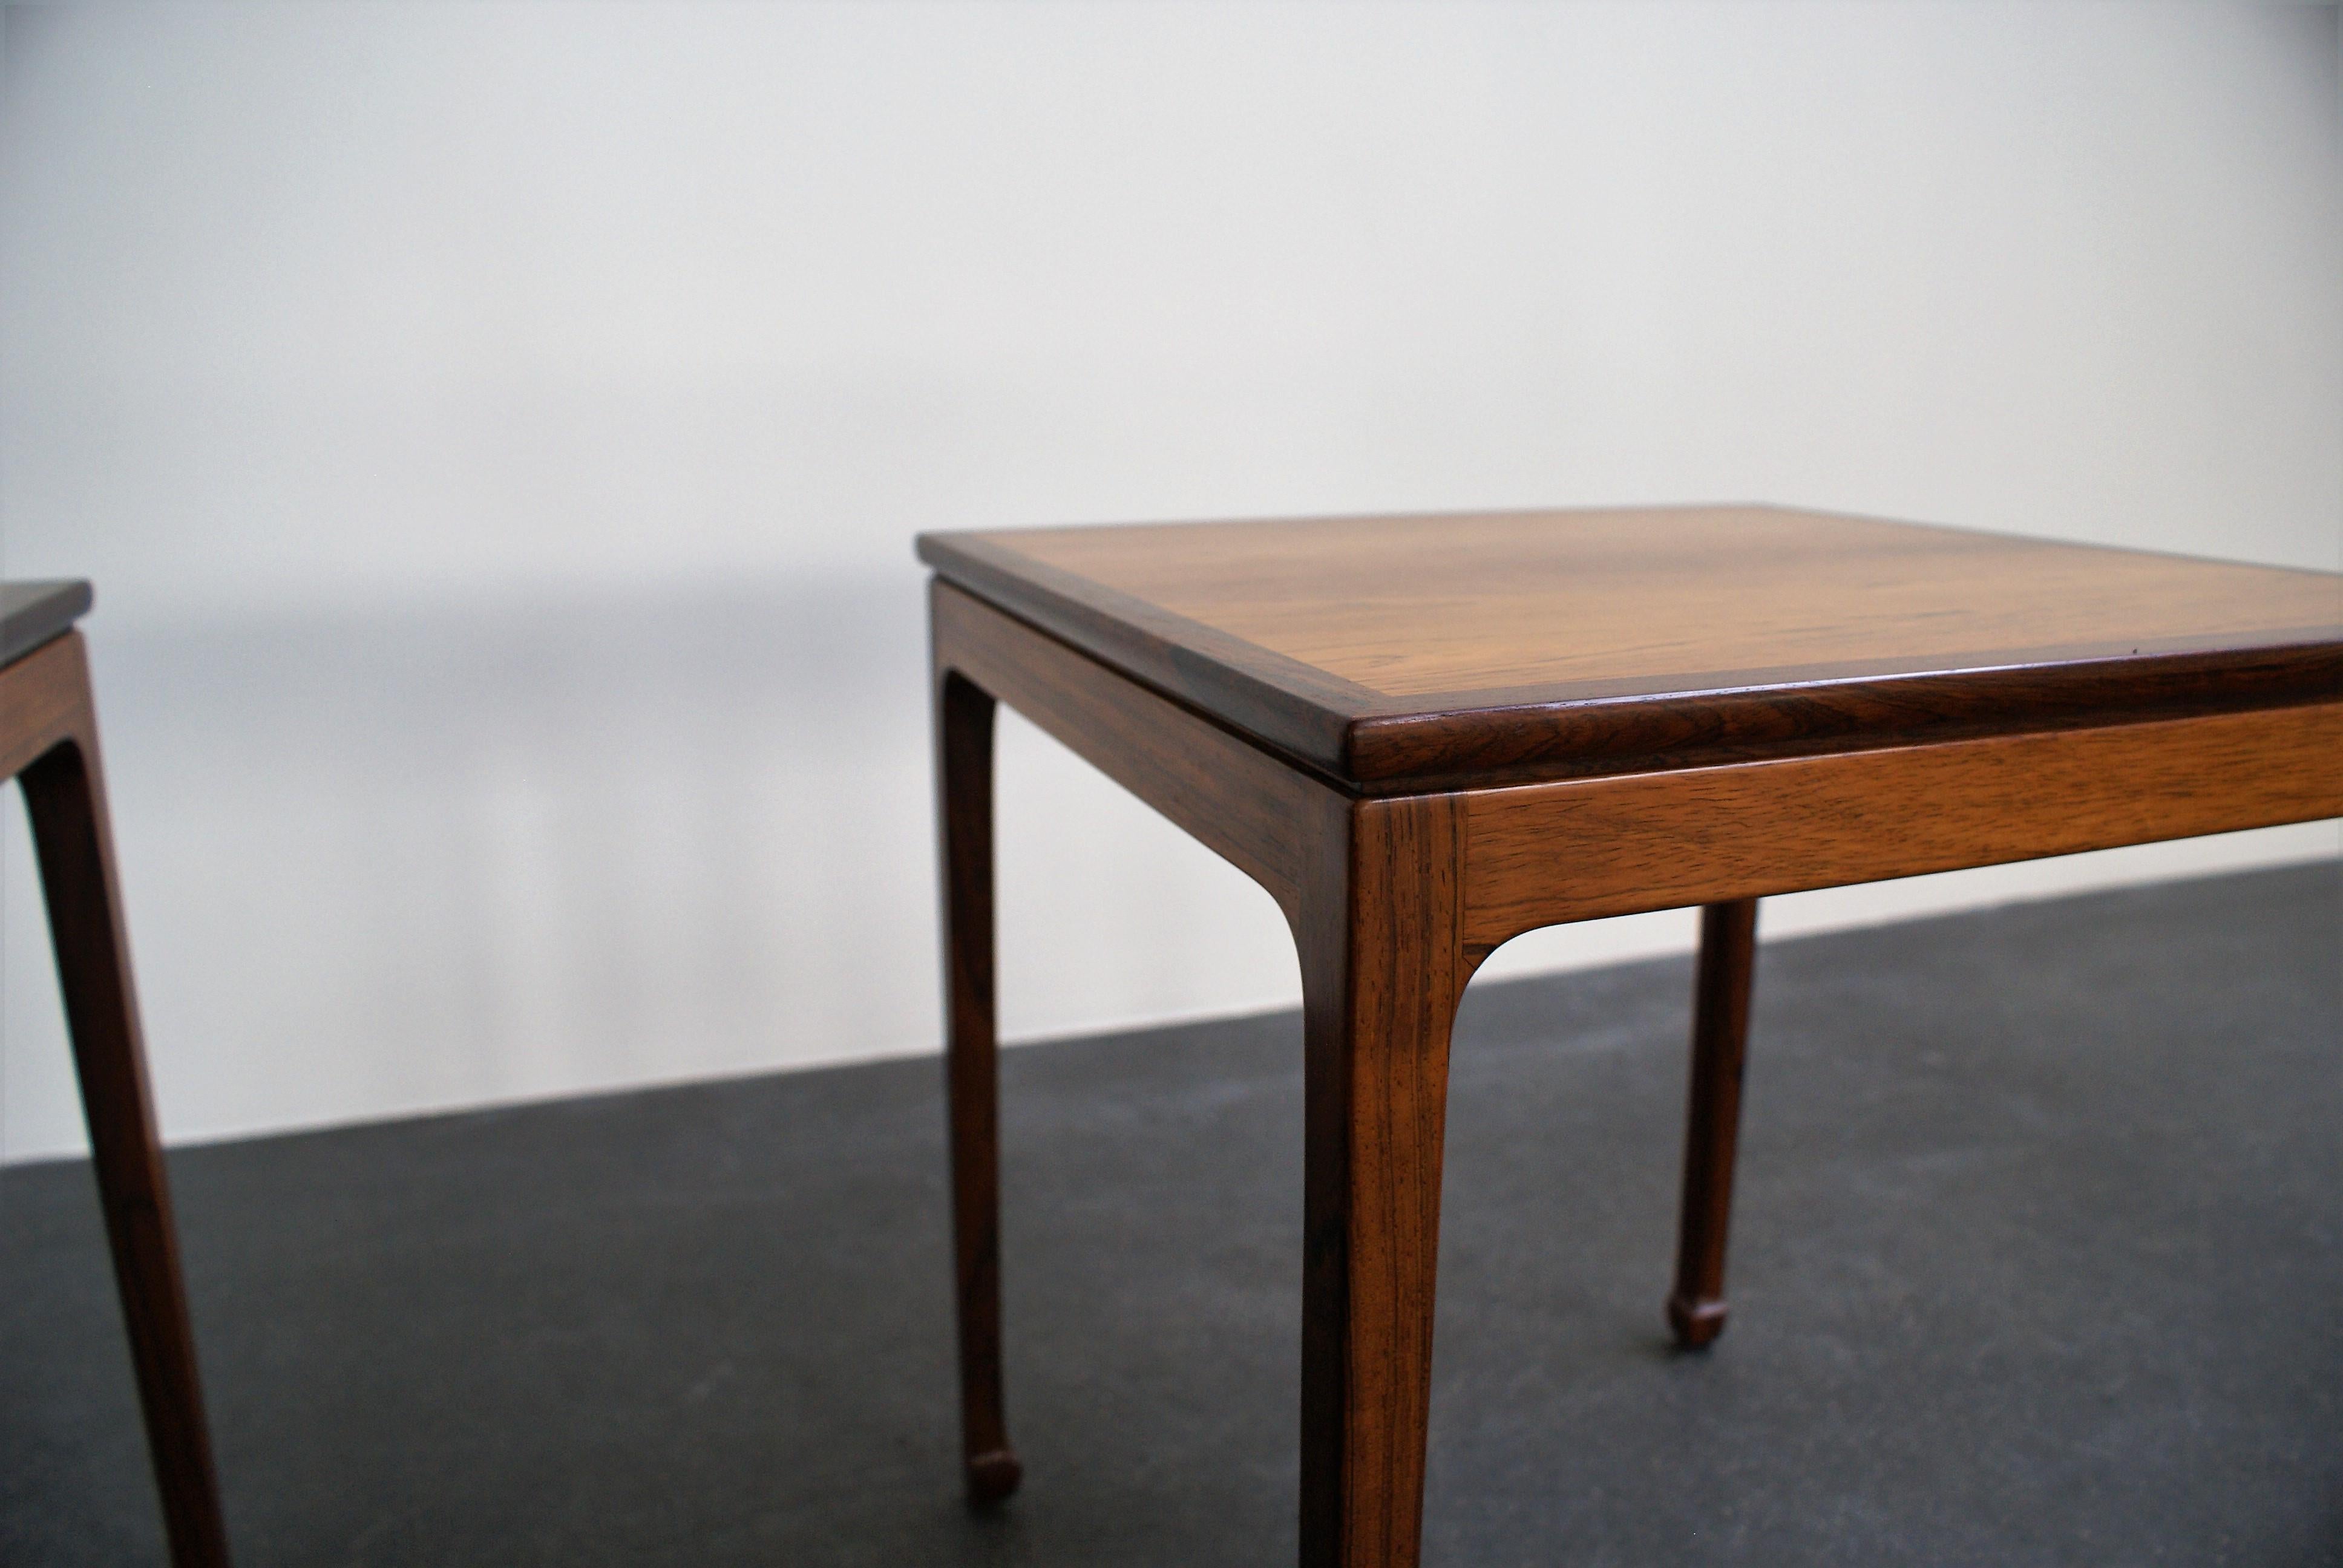 Ole Wanscher Pair of Side Tables in Brazilian Rosewood for A. J. Iversen, 1957 For Sale 4